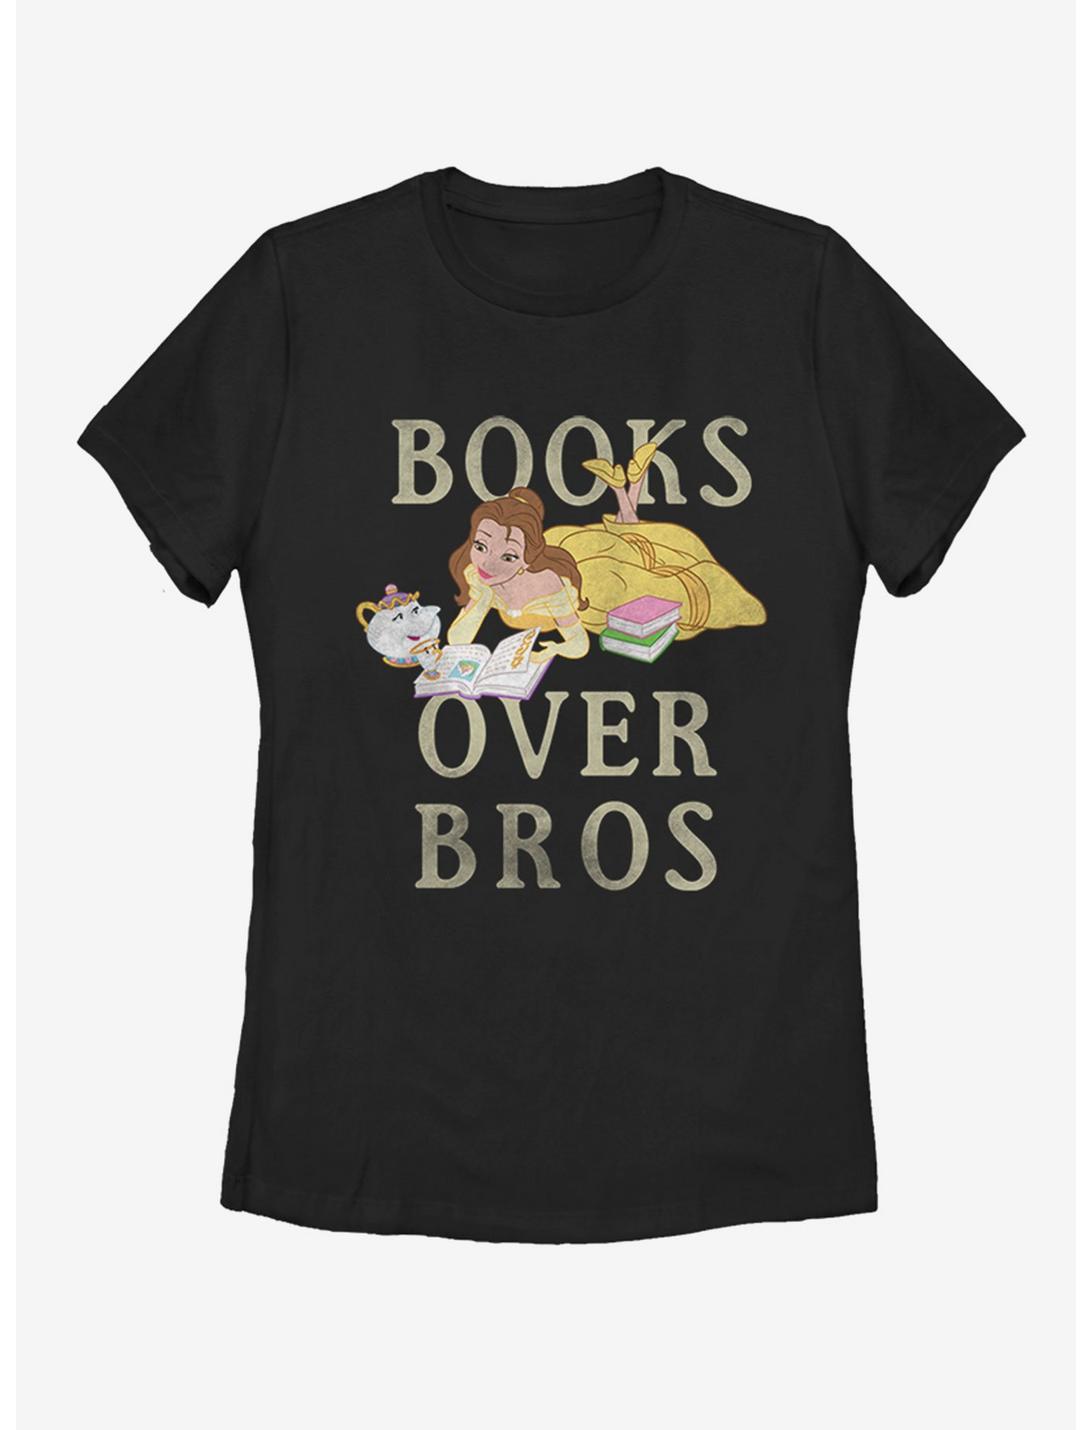 Disney Beauty and The Beast Books Before Bros Womens T-Shirt, BLACK, hi-res